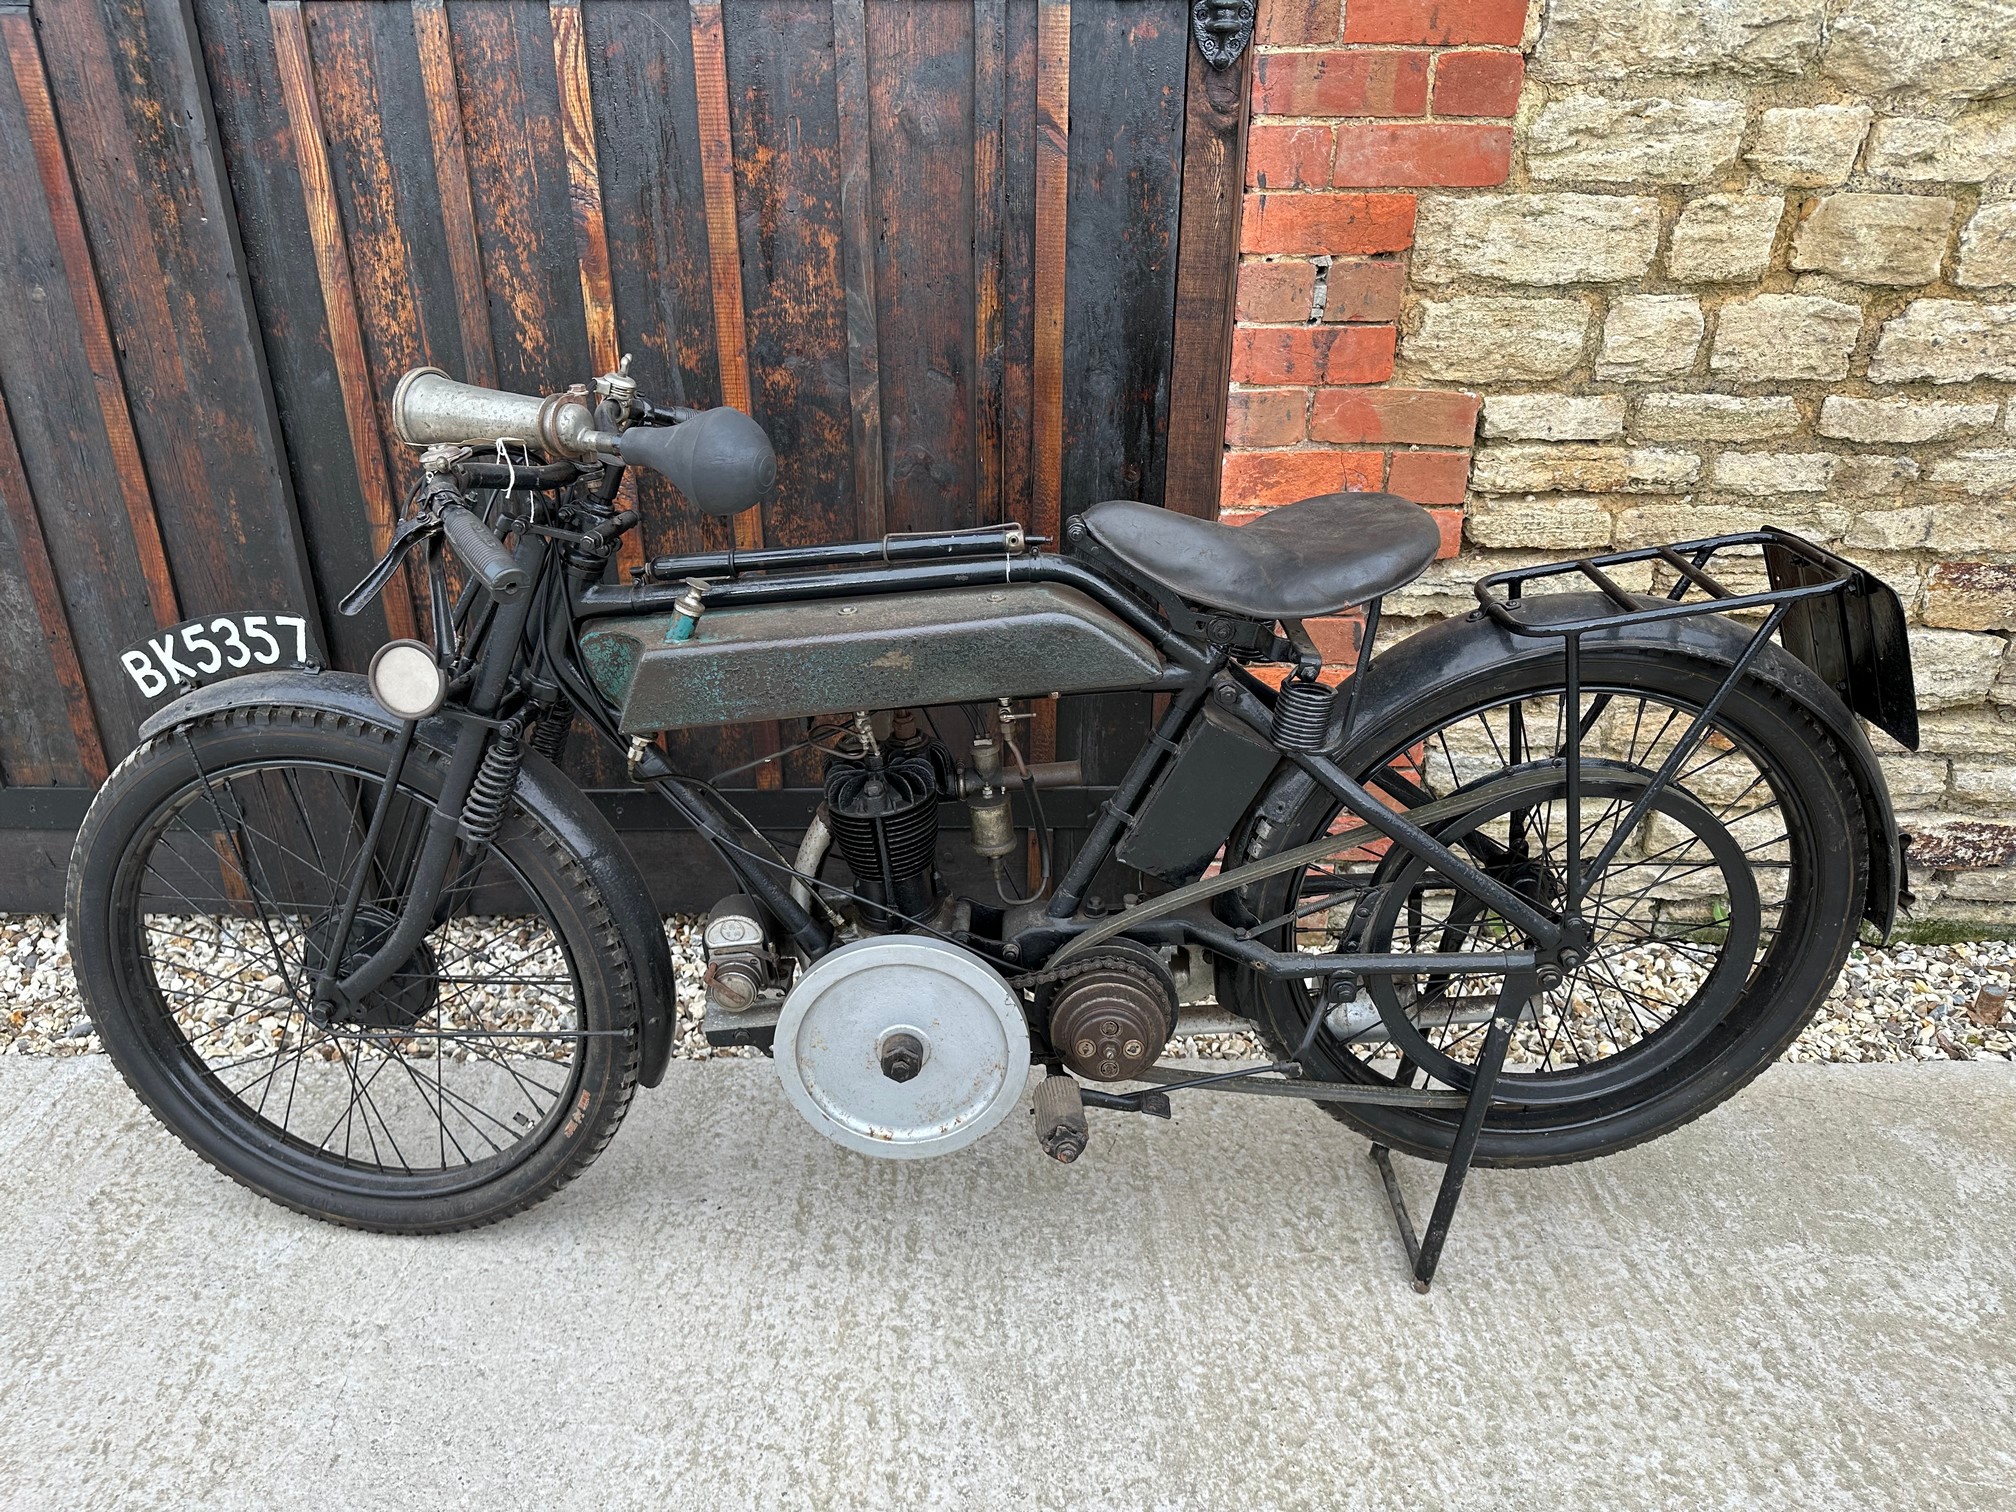 1920 H-B. (Hill Brothers) 250cc SIDE VALVE MOTORCYCLE - Image 2 of 5